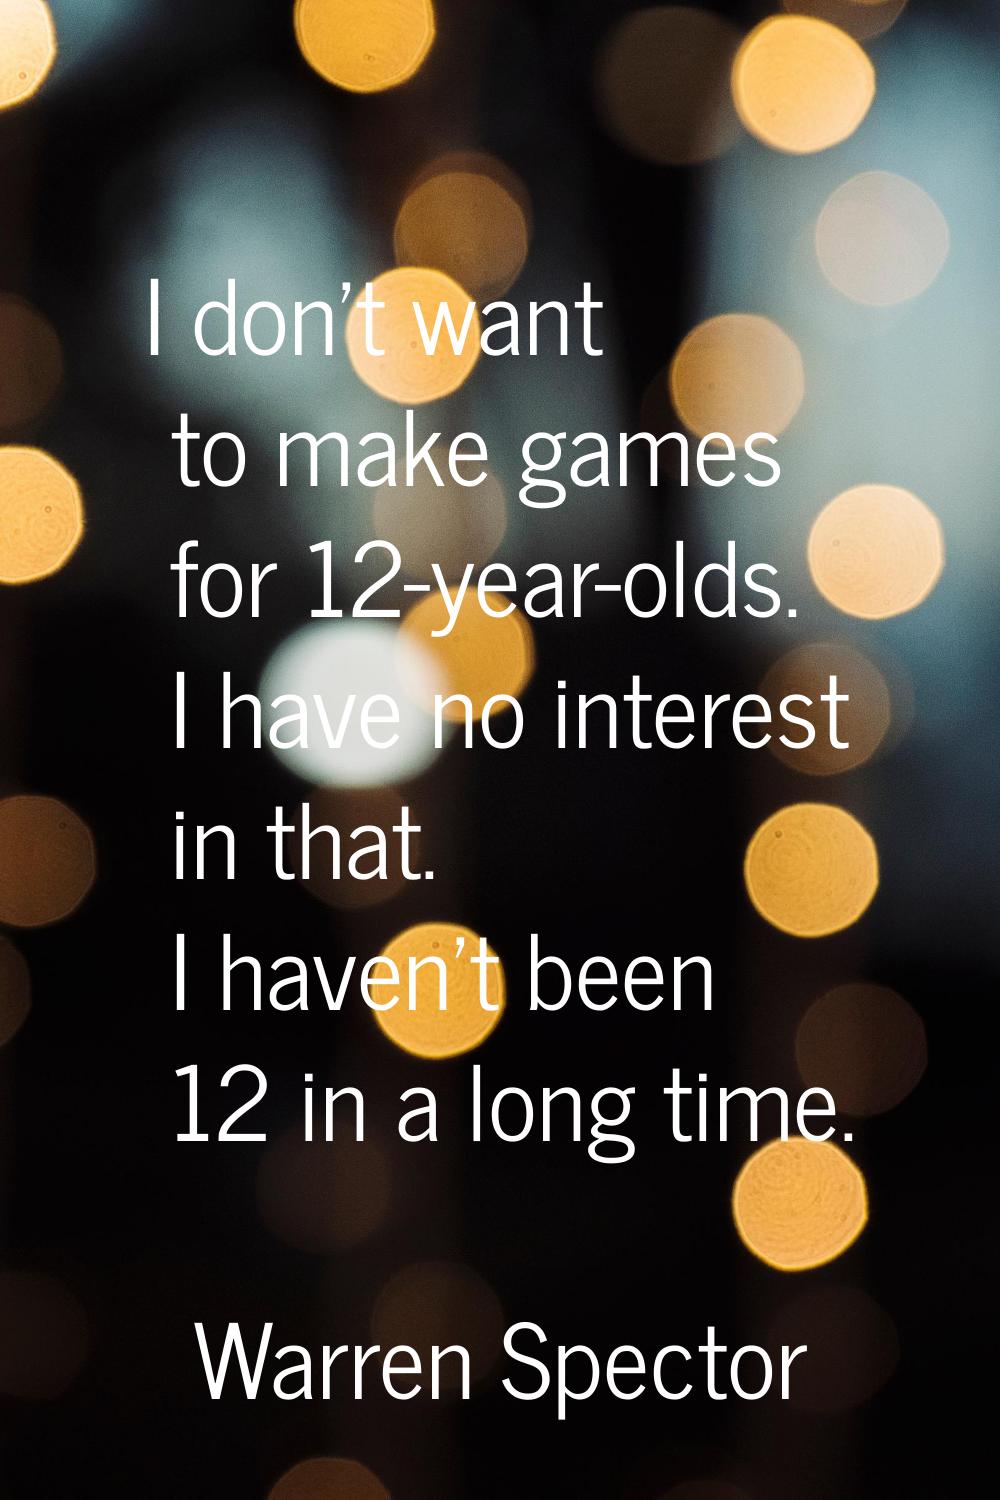 I don't want to make games for 12-year-olds. I have no interest in that. I haven't been 12 in a lon